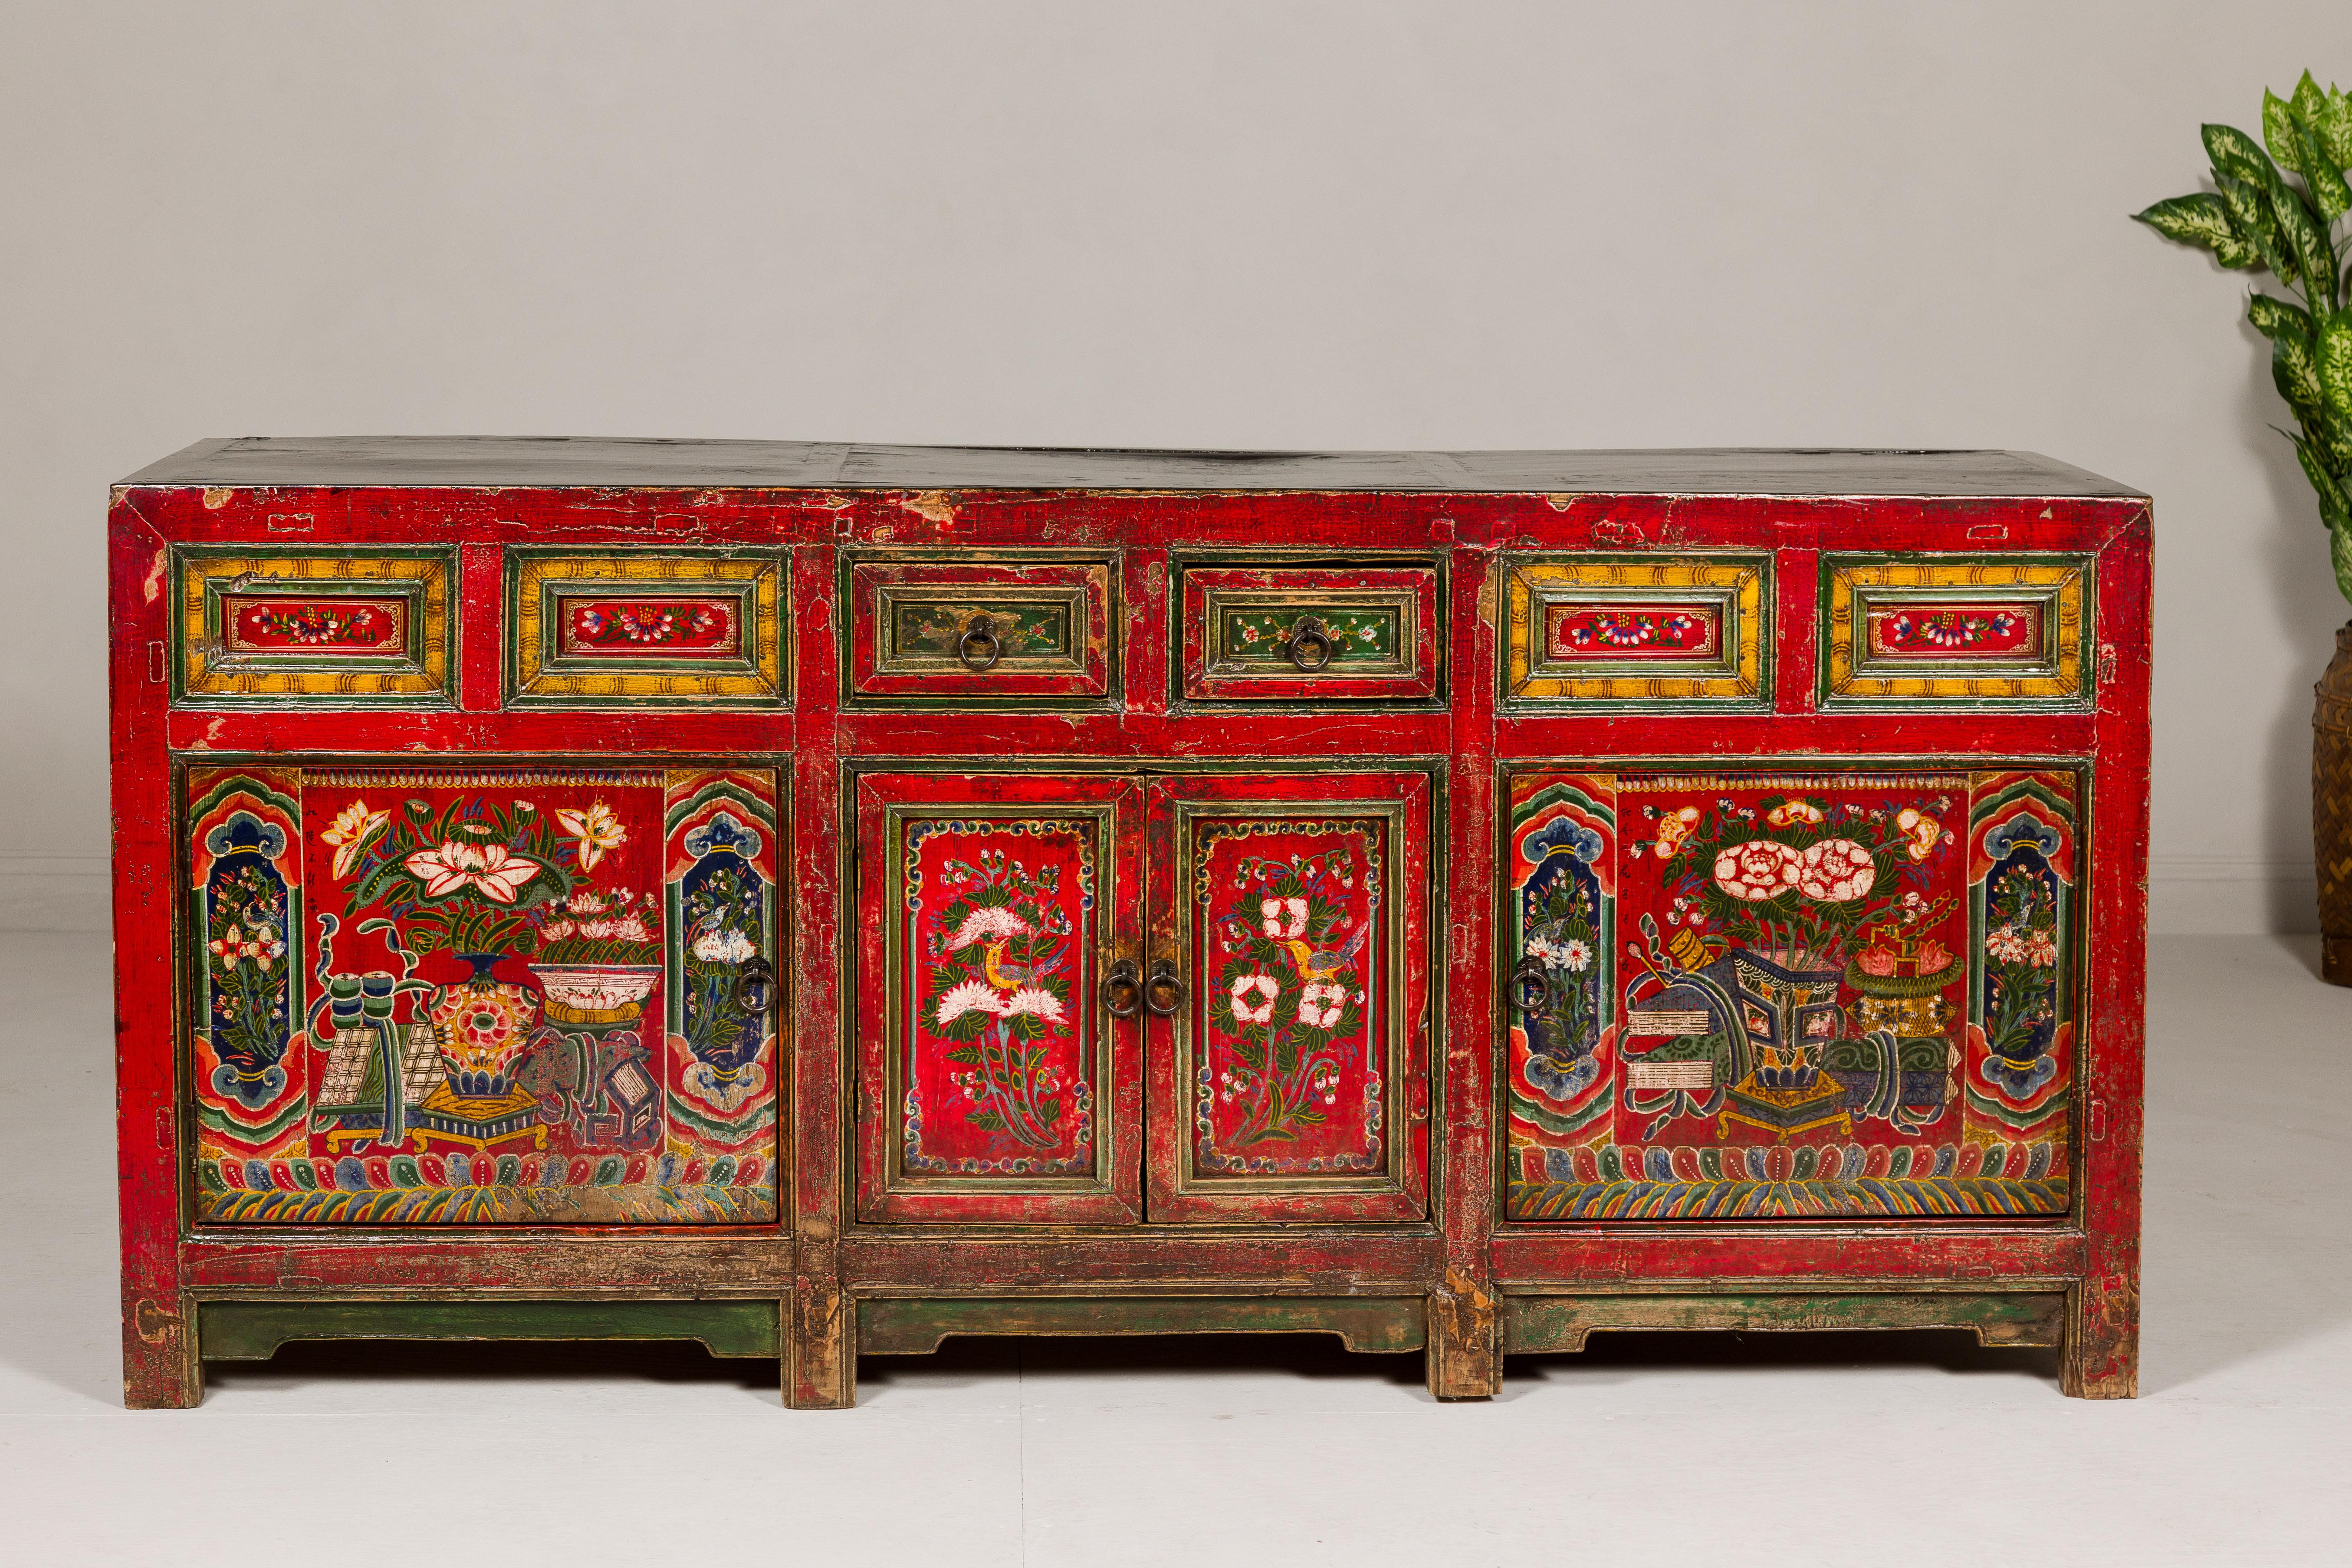 19th Century Mongolian Polychrome Sideboard with Doors, Drawers and Floral Décor 9